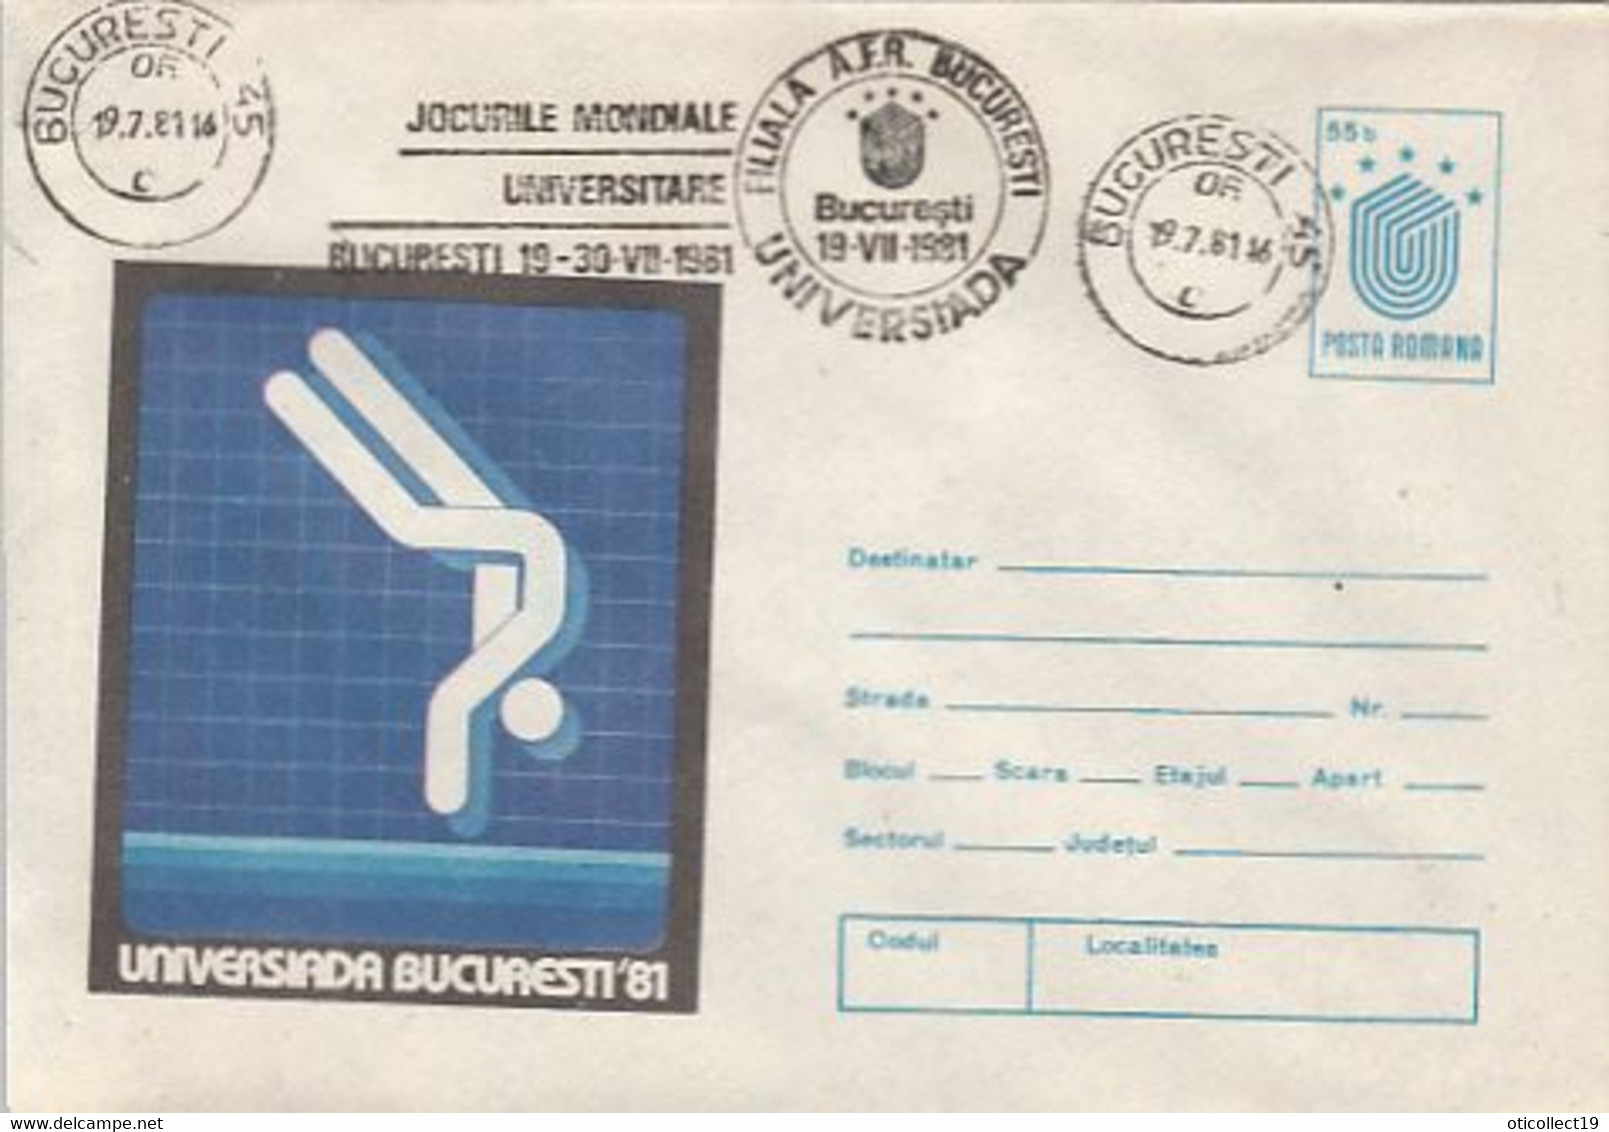 SPORTS, DIVING, WORLD UNIVERSITY GAMES, COVER STATIONERY, 1981, ROMANIA - Duiken